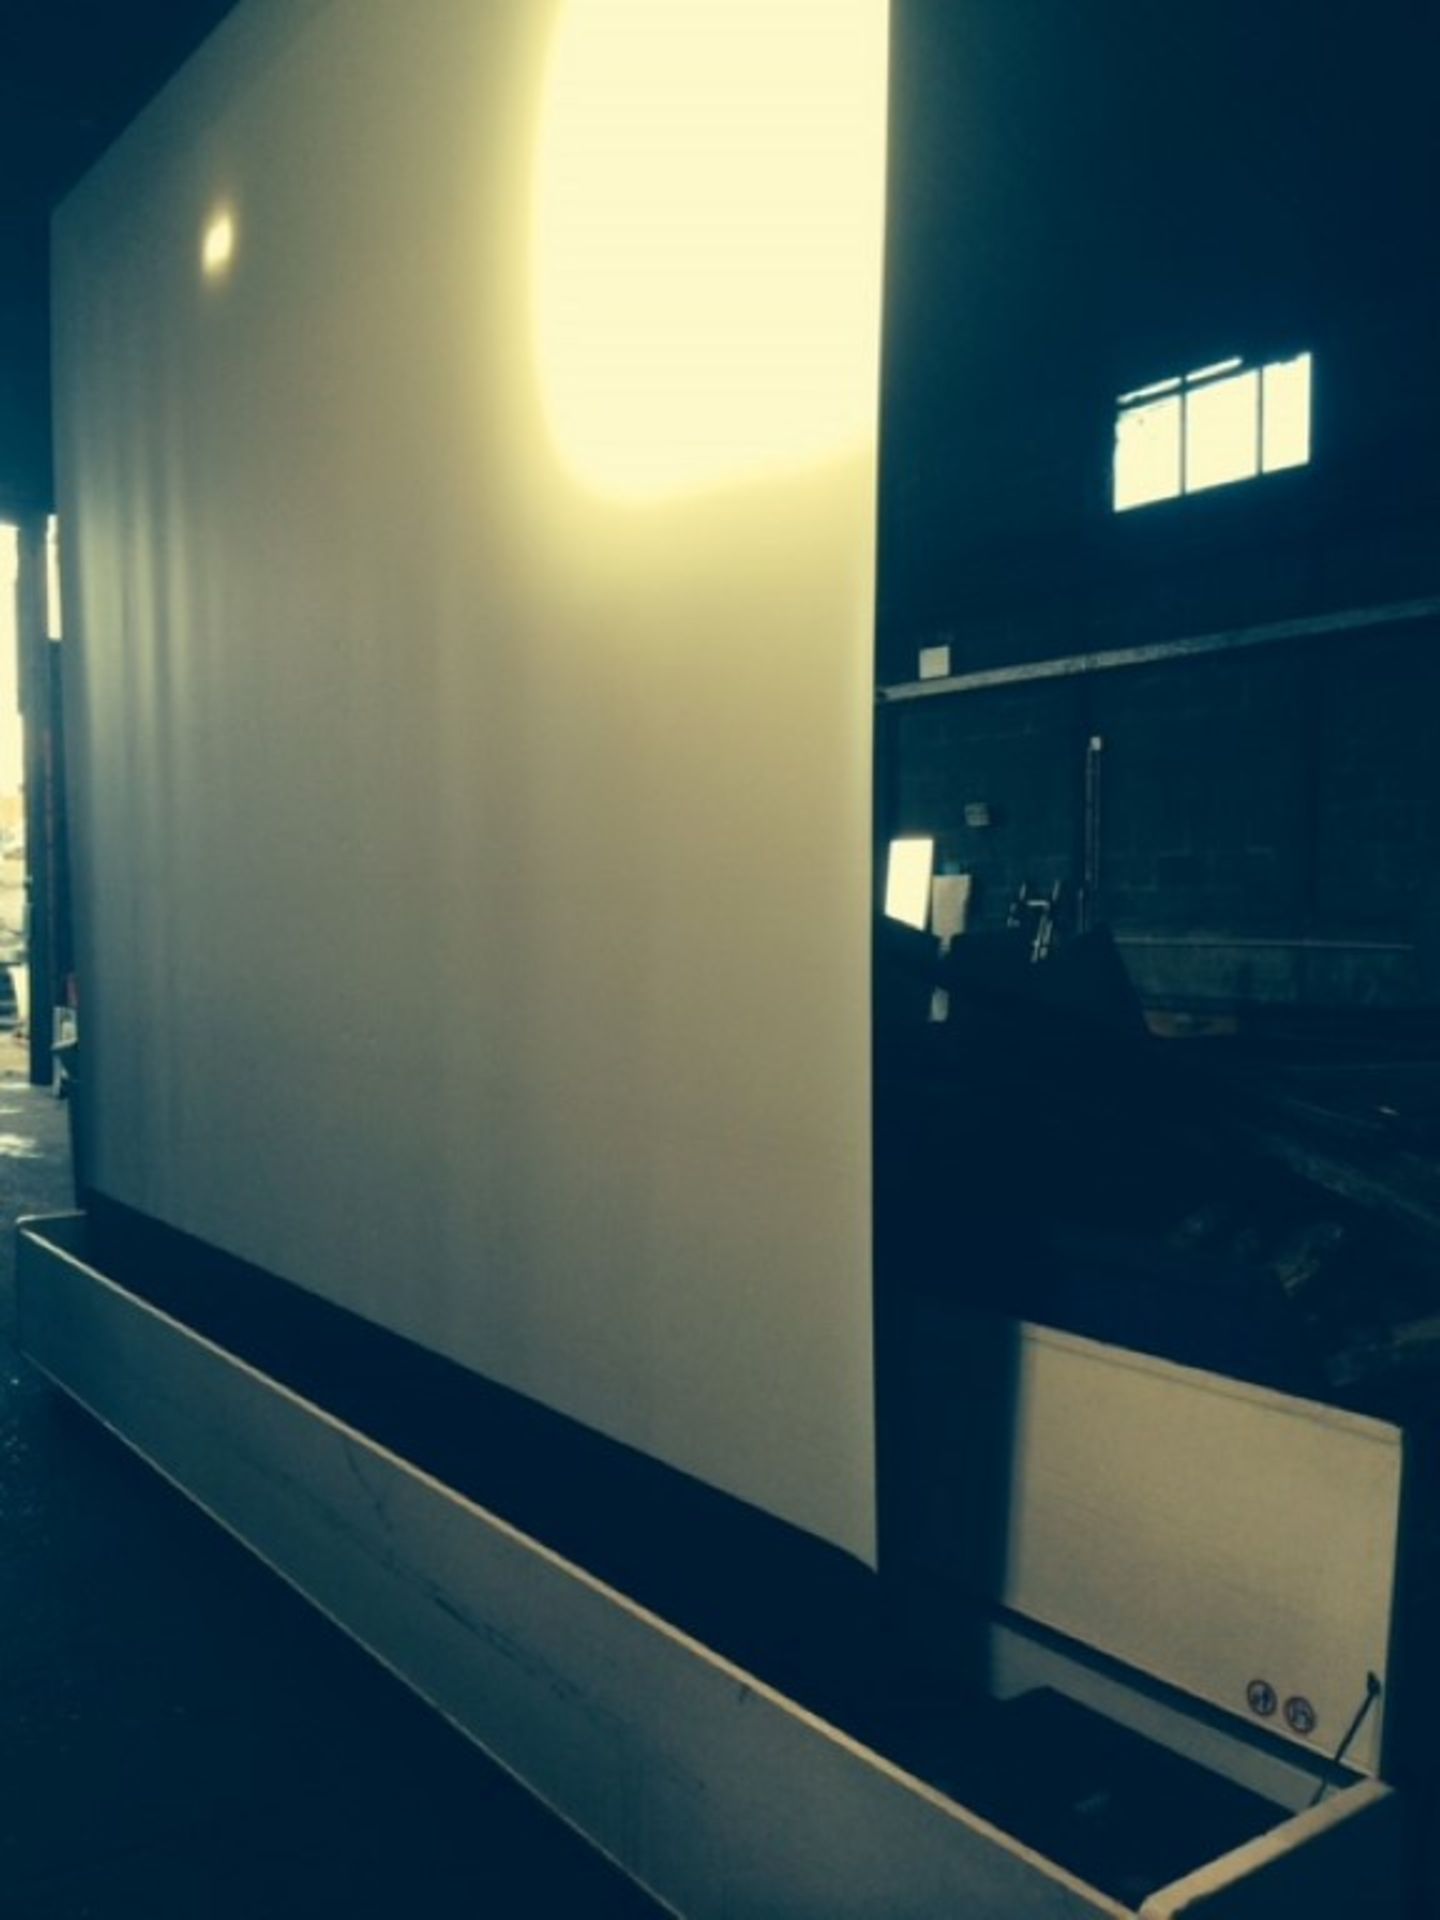 1 x Rank Xerox 16ft x 16ft Projector Screen with Rams and Mobile Storage Enclosure-  Electrically - Image 5 of 10